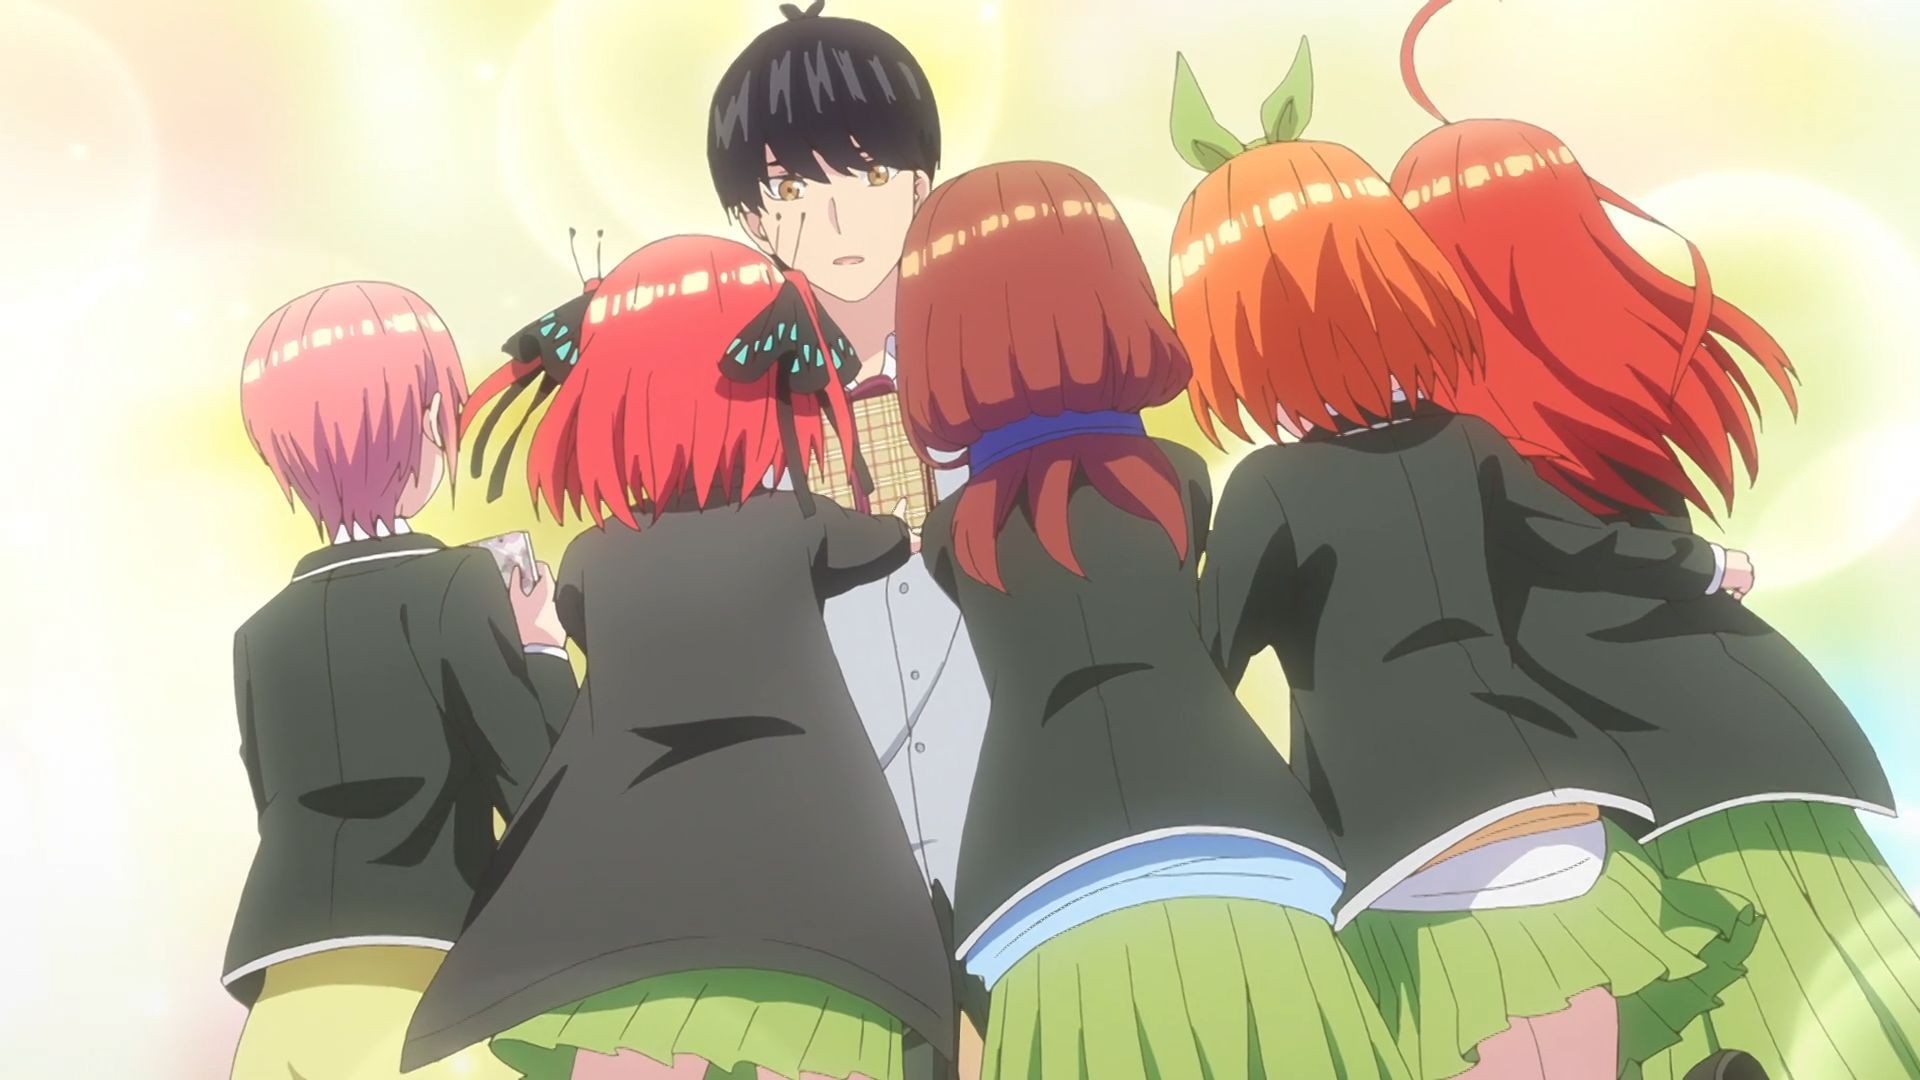 New Quintessential Quintuplets Anime by Shaft Gets Trailer - Anime Corner